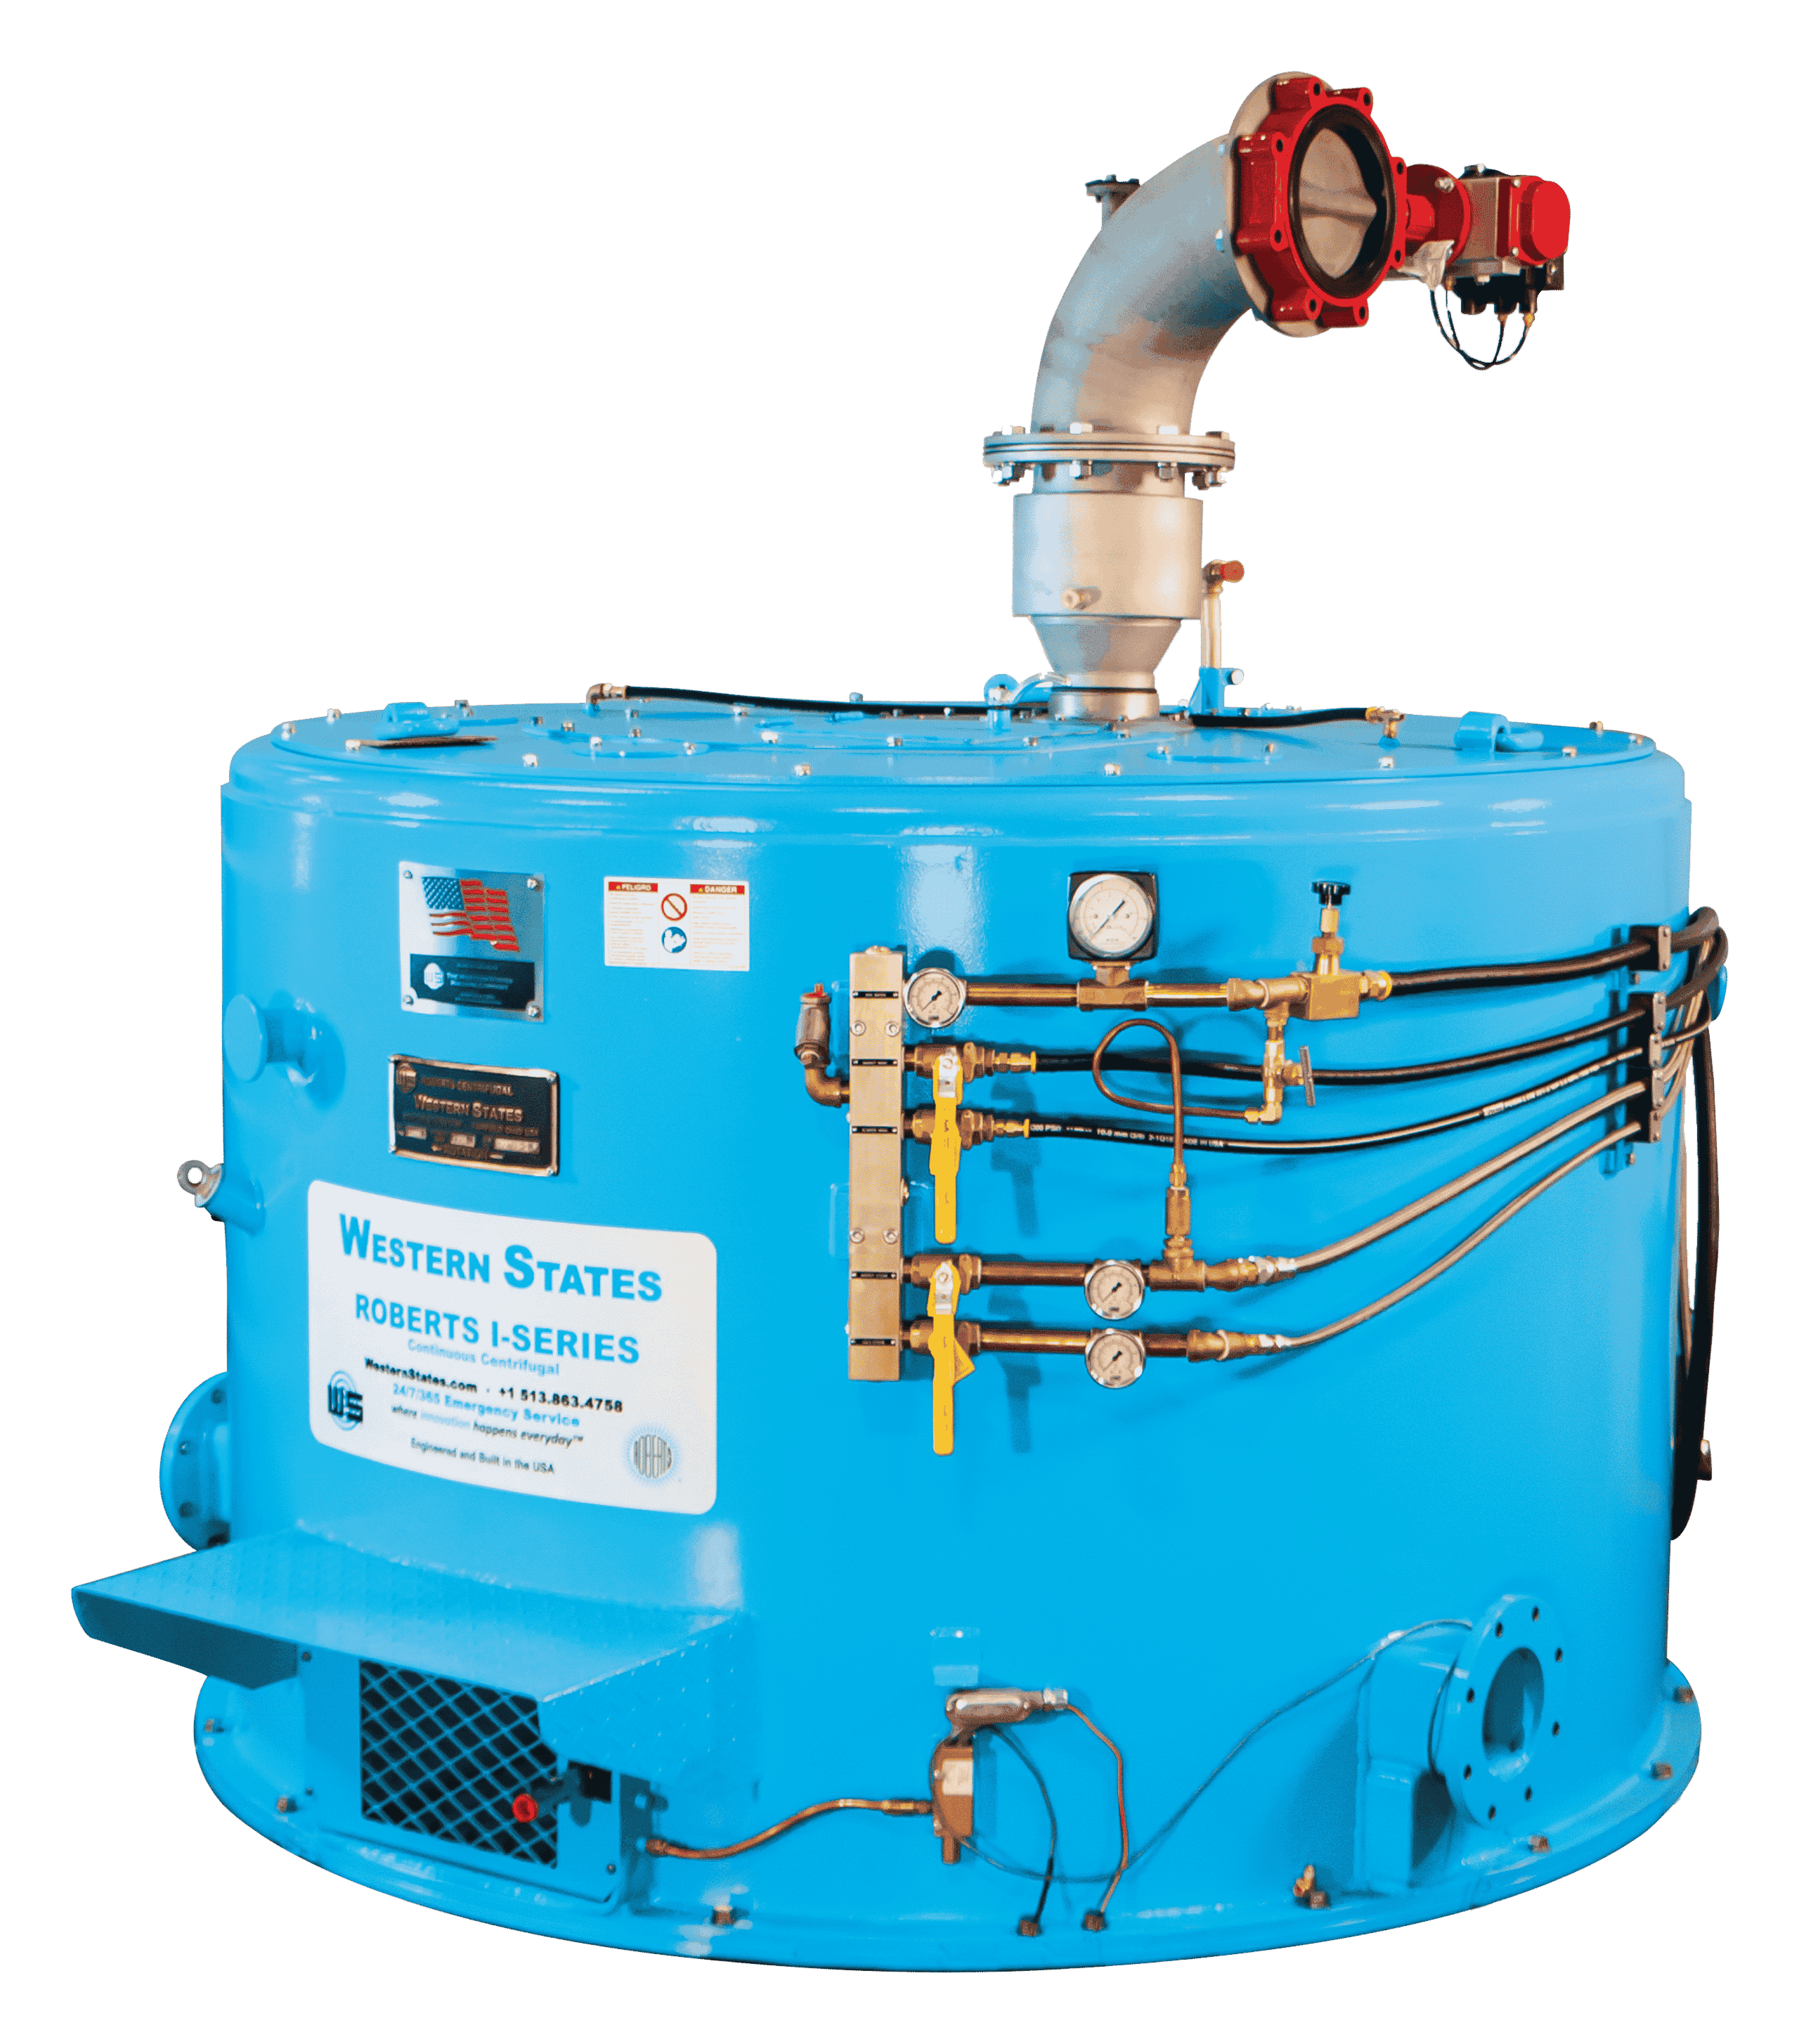 Product Roberts I-Series Continuous Centrifuge - Western States image